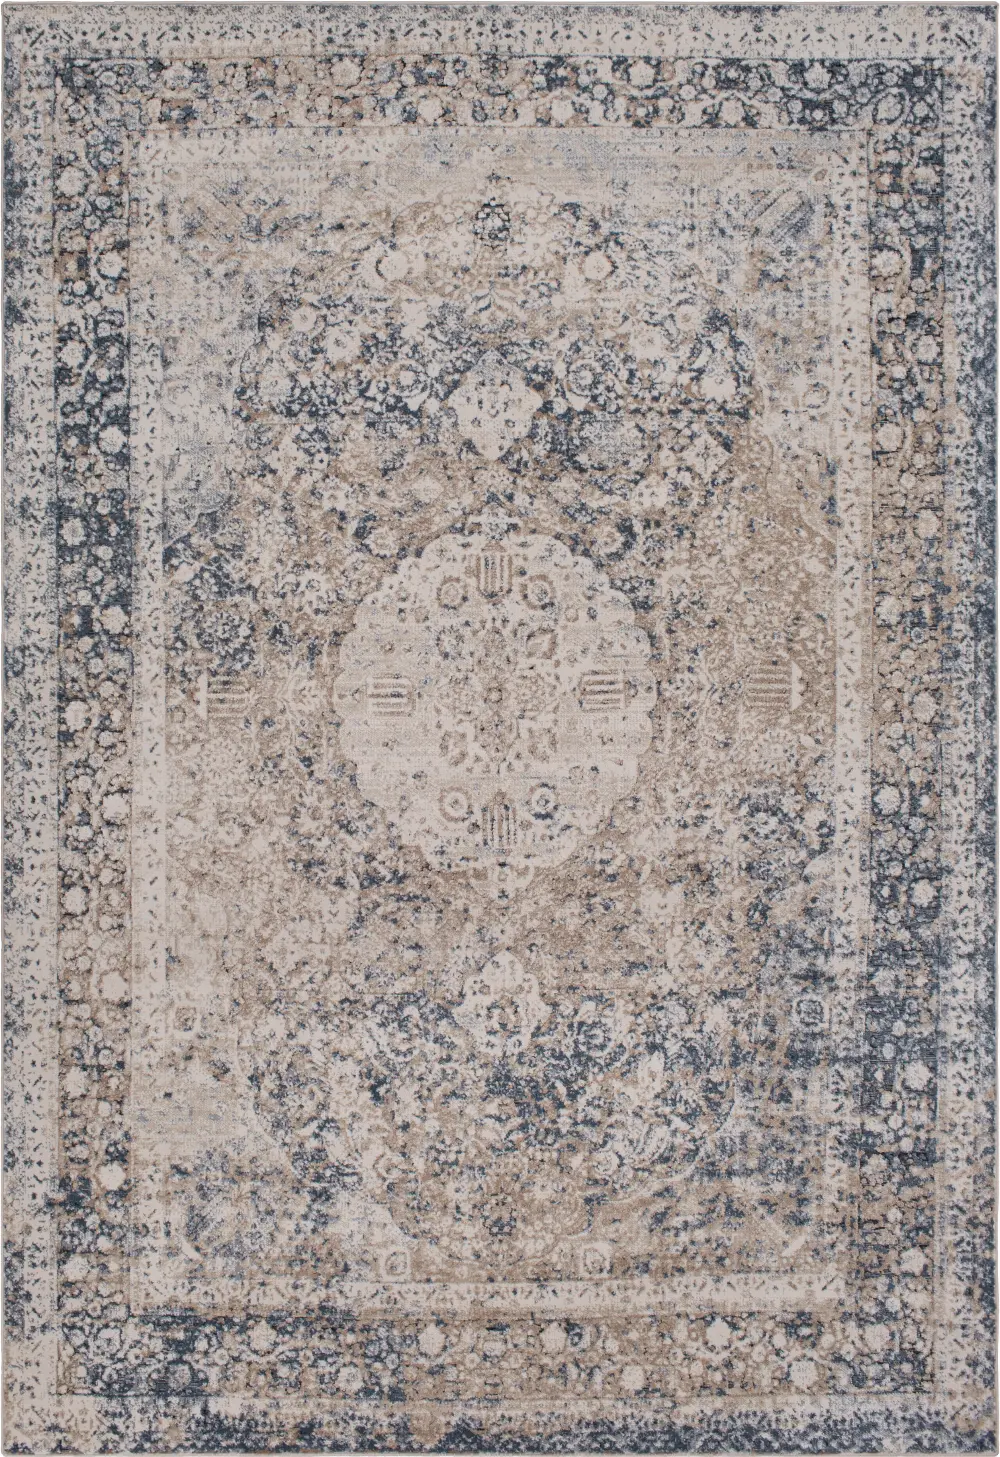 8 x 10 X-Large Taupe and Charcoal Gray Area Rug - Durham-1